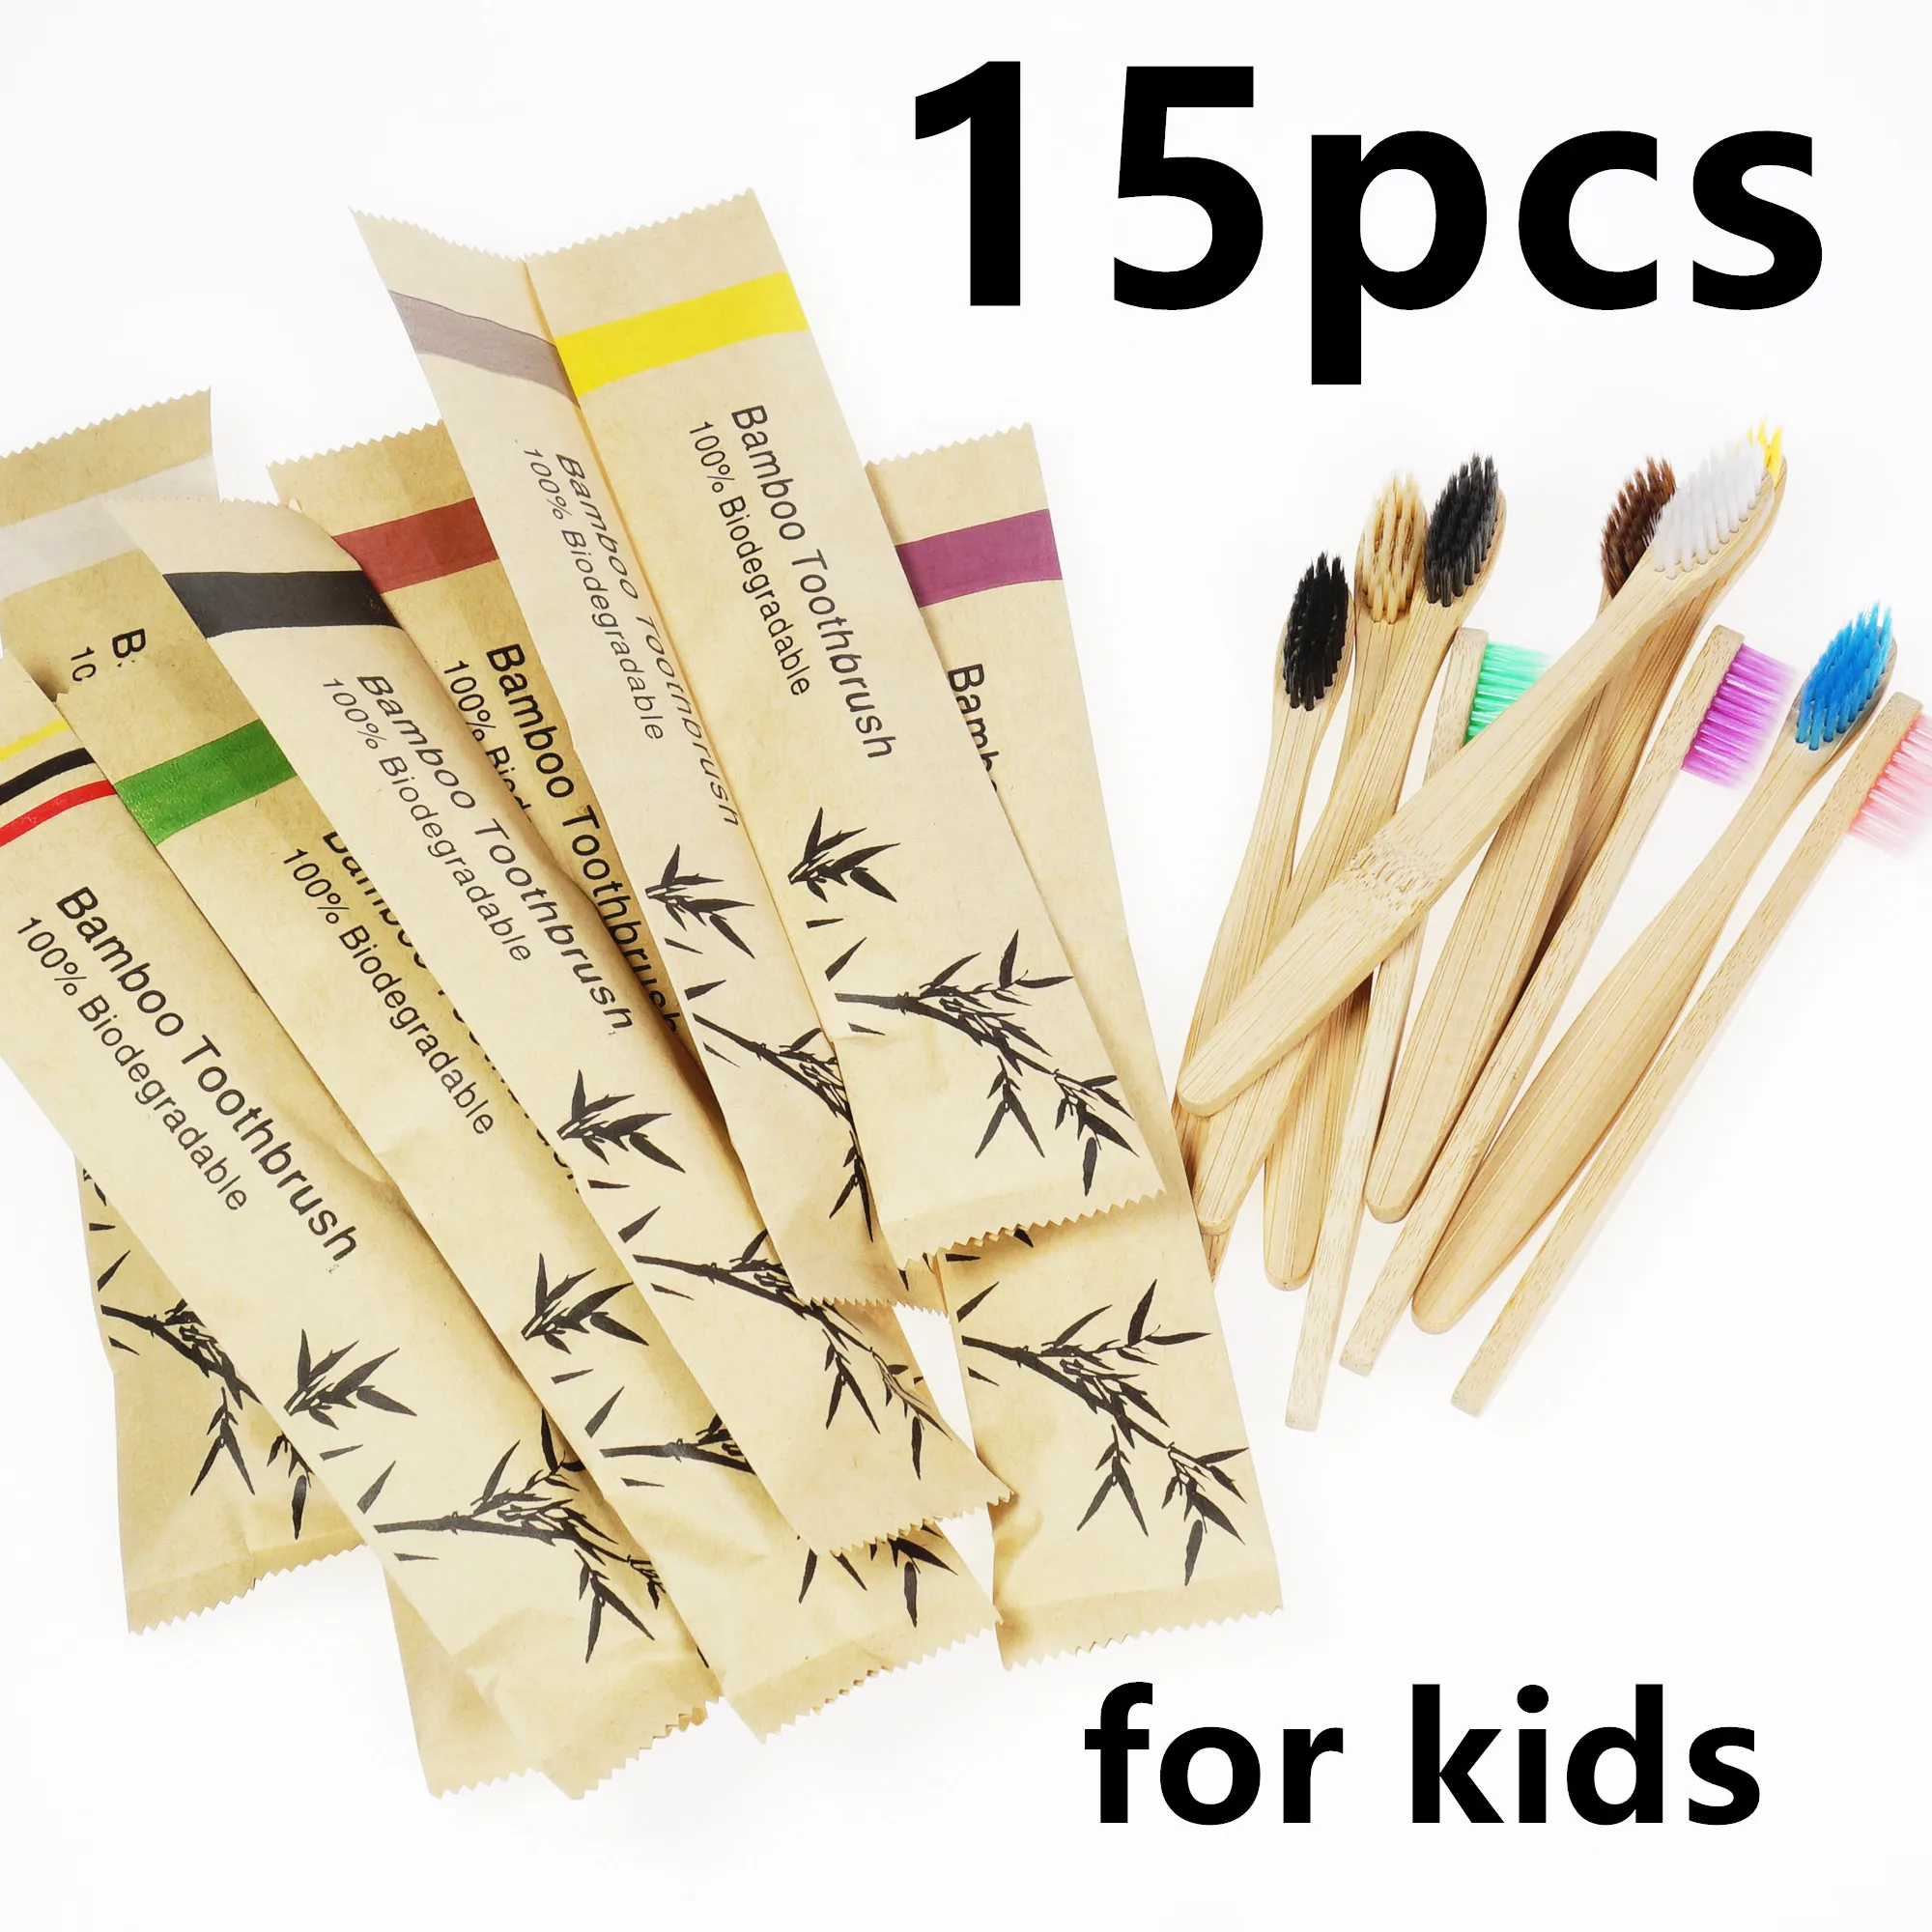 15pcs Children's Colorful Toothbrush Natural Bamboo Tooth Brush Set Soft Medium Bristle Teeth Care Eco Bamboo Toothbrushes Denta